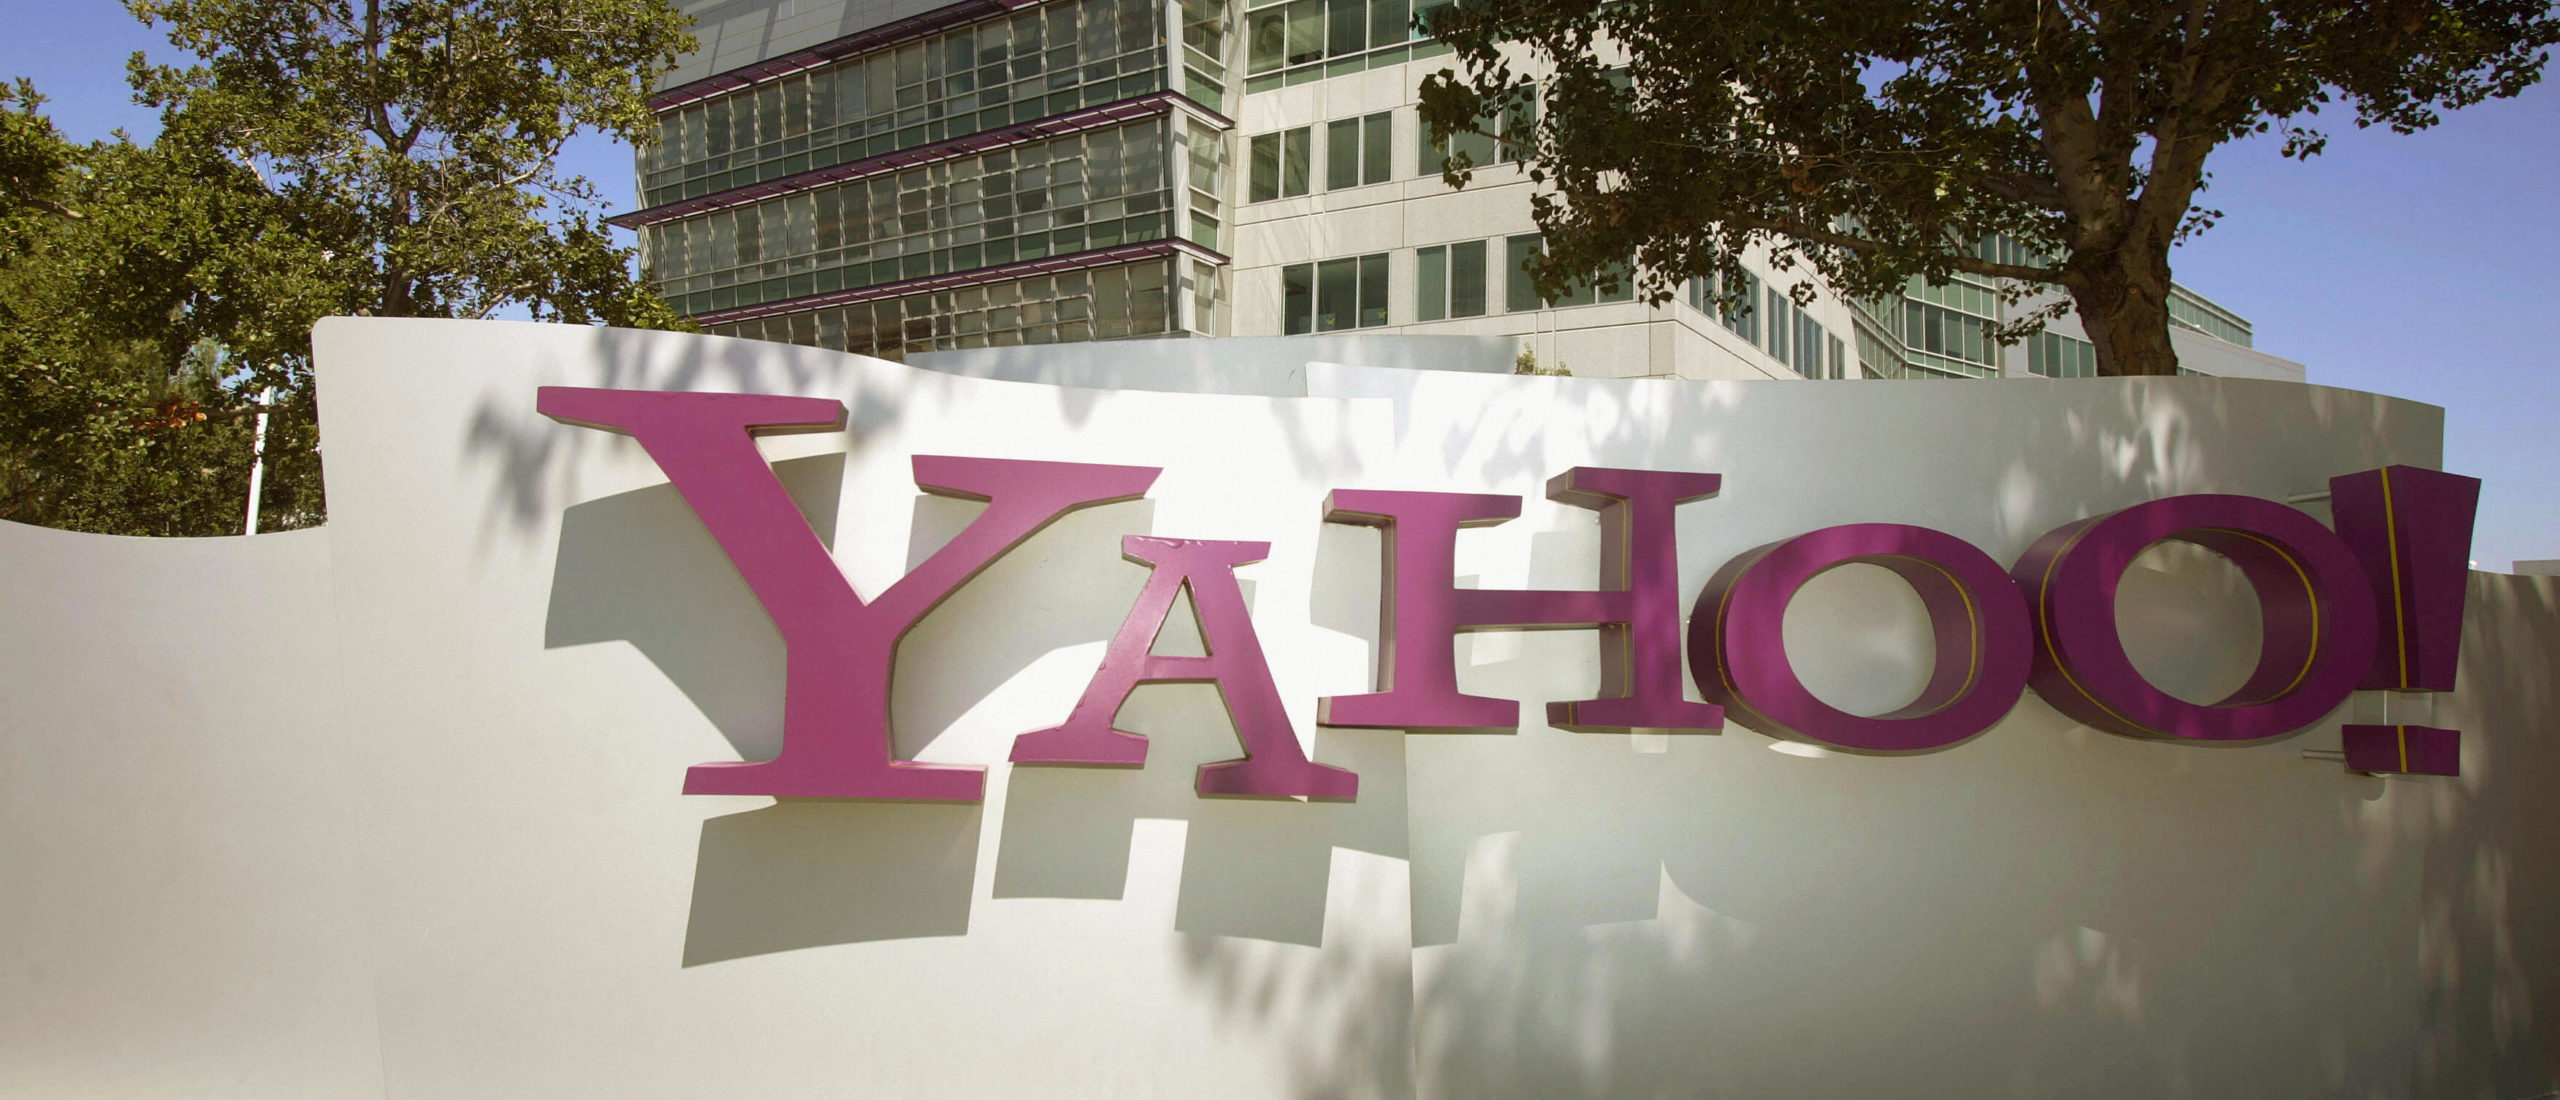 The entrance of Yahoo headquarters in Sunnyvale, California is seen in this 20 August 2005 photo.Internet giant Yahoo announced plans 11 October, 2005 to include 